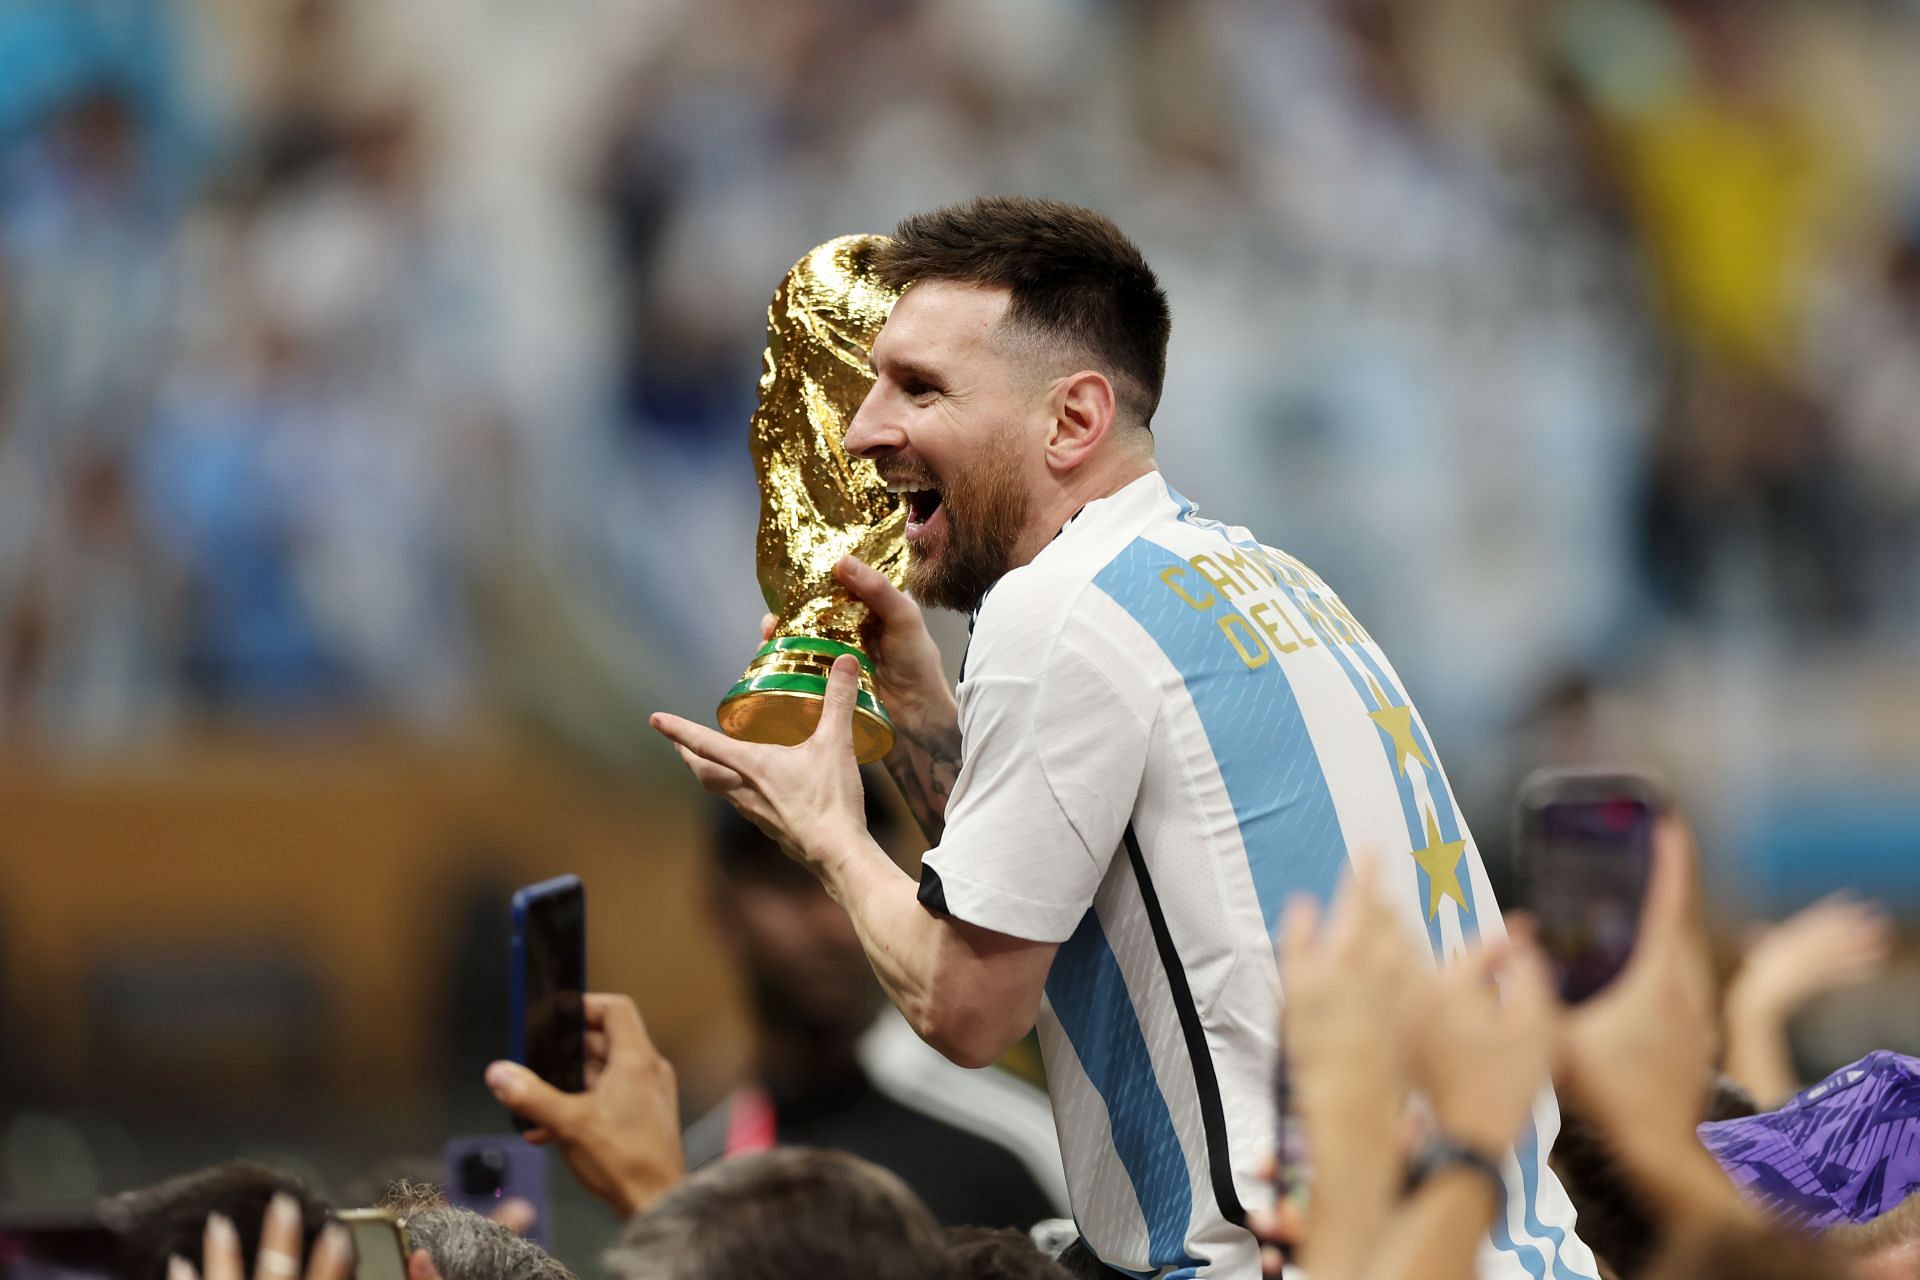 The Argentine hero finally got his hands on the World Cup.